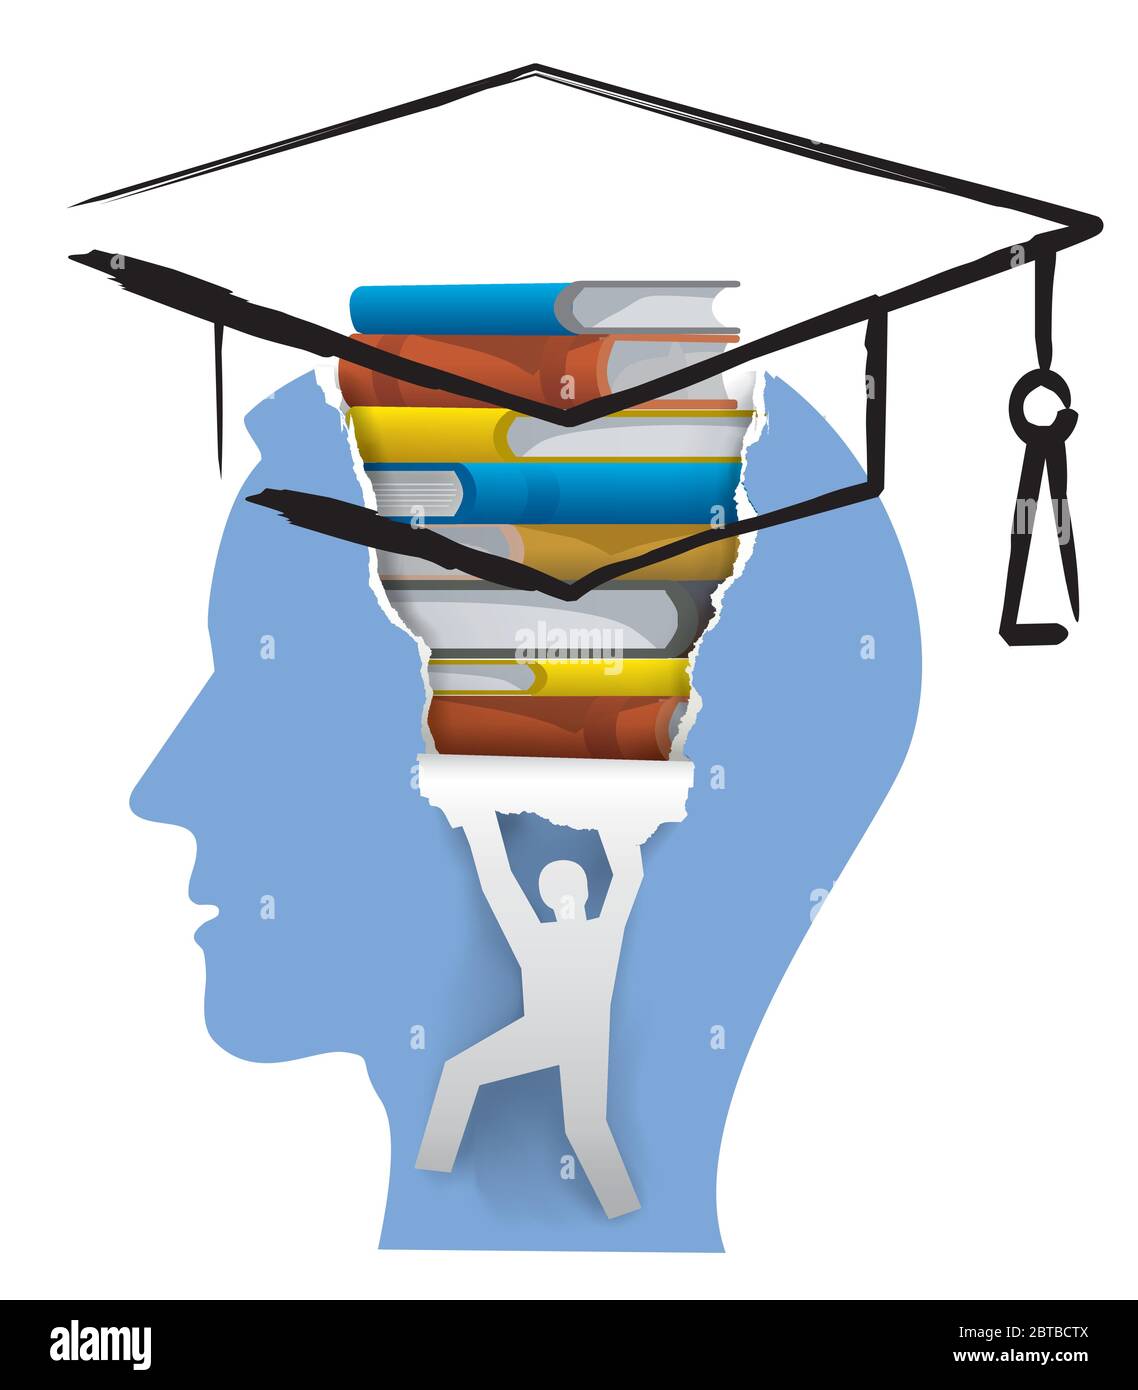 Student, School Literature for Graduation. Stylized Male head in profile with books, brush drawn mortar board and male silhouette ripping paper. Stock Vector